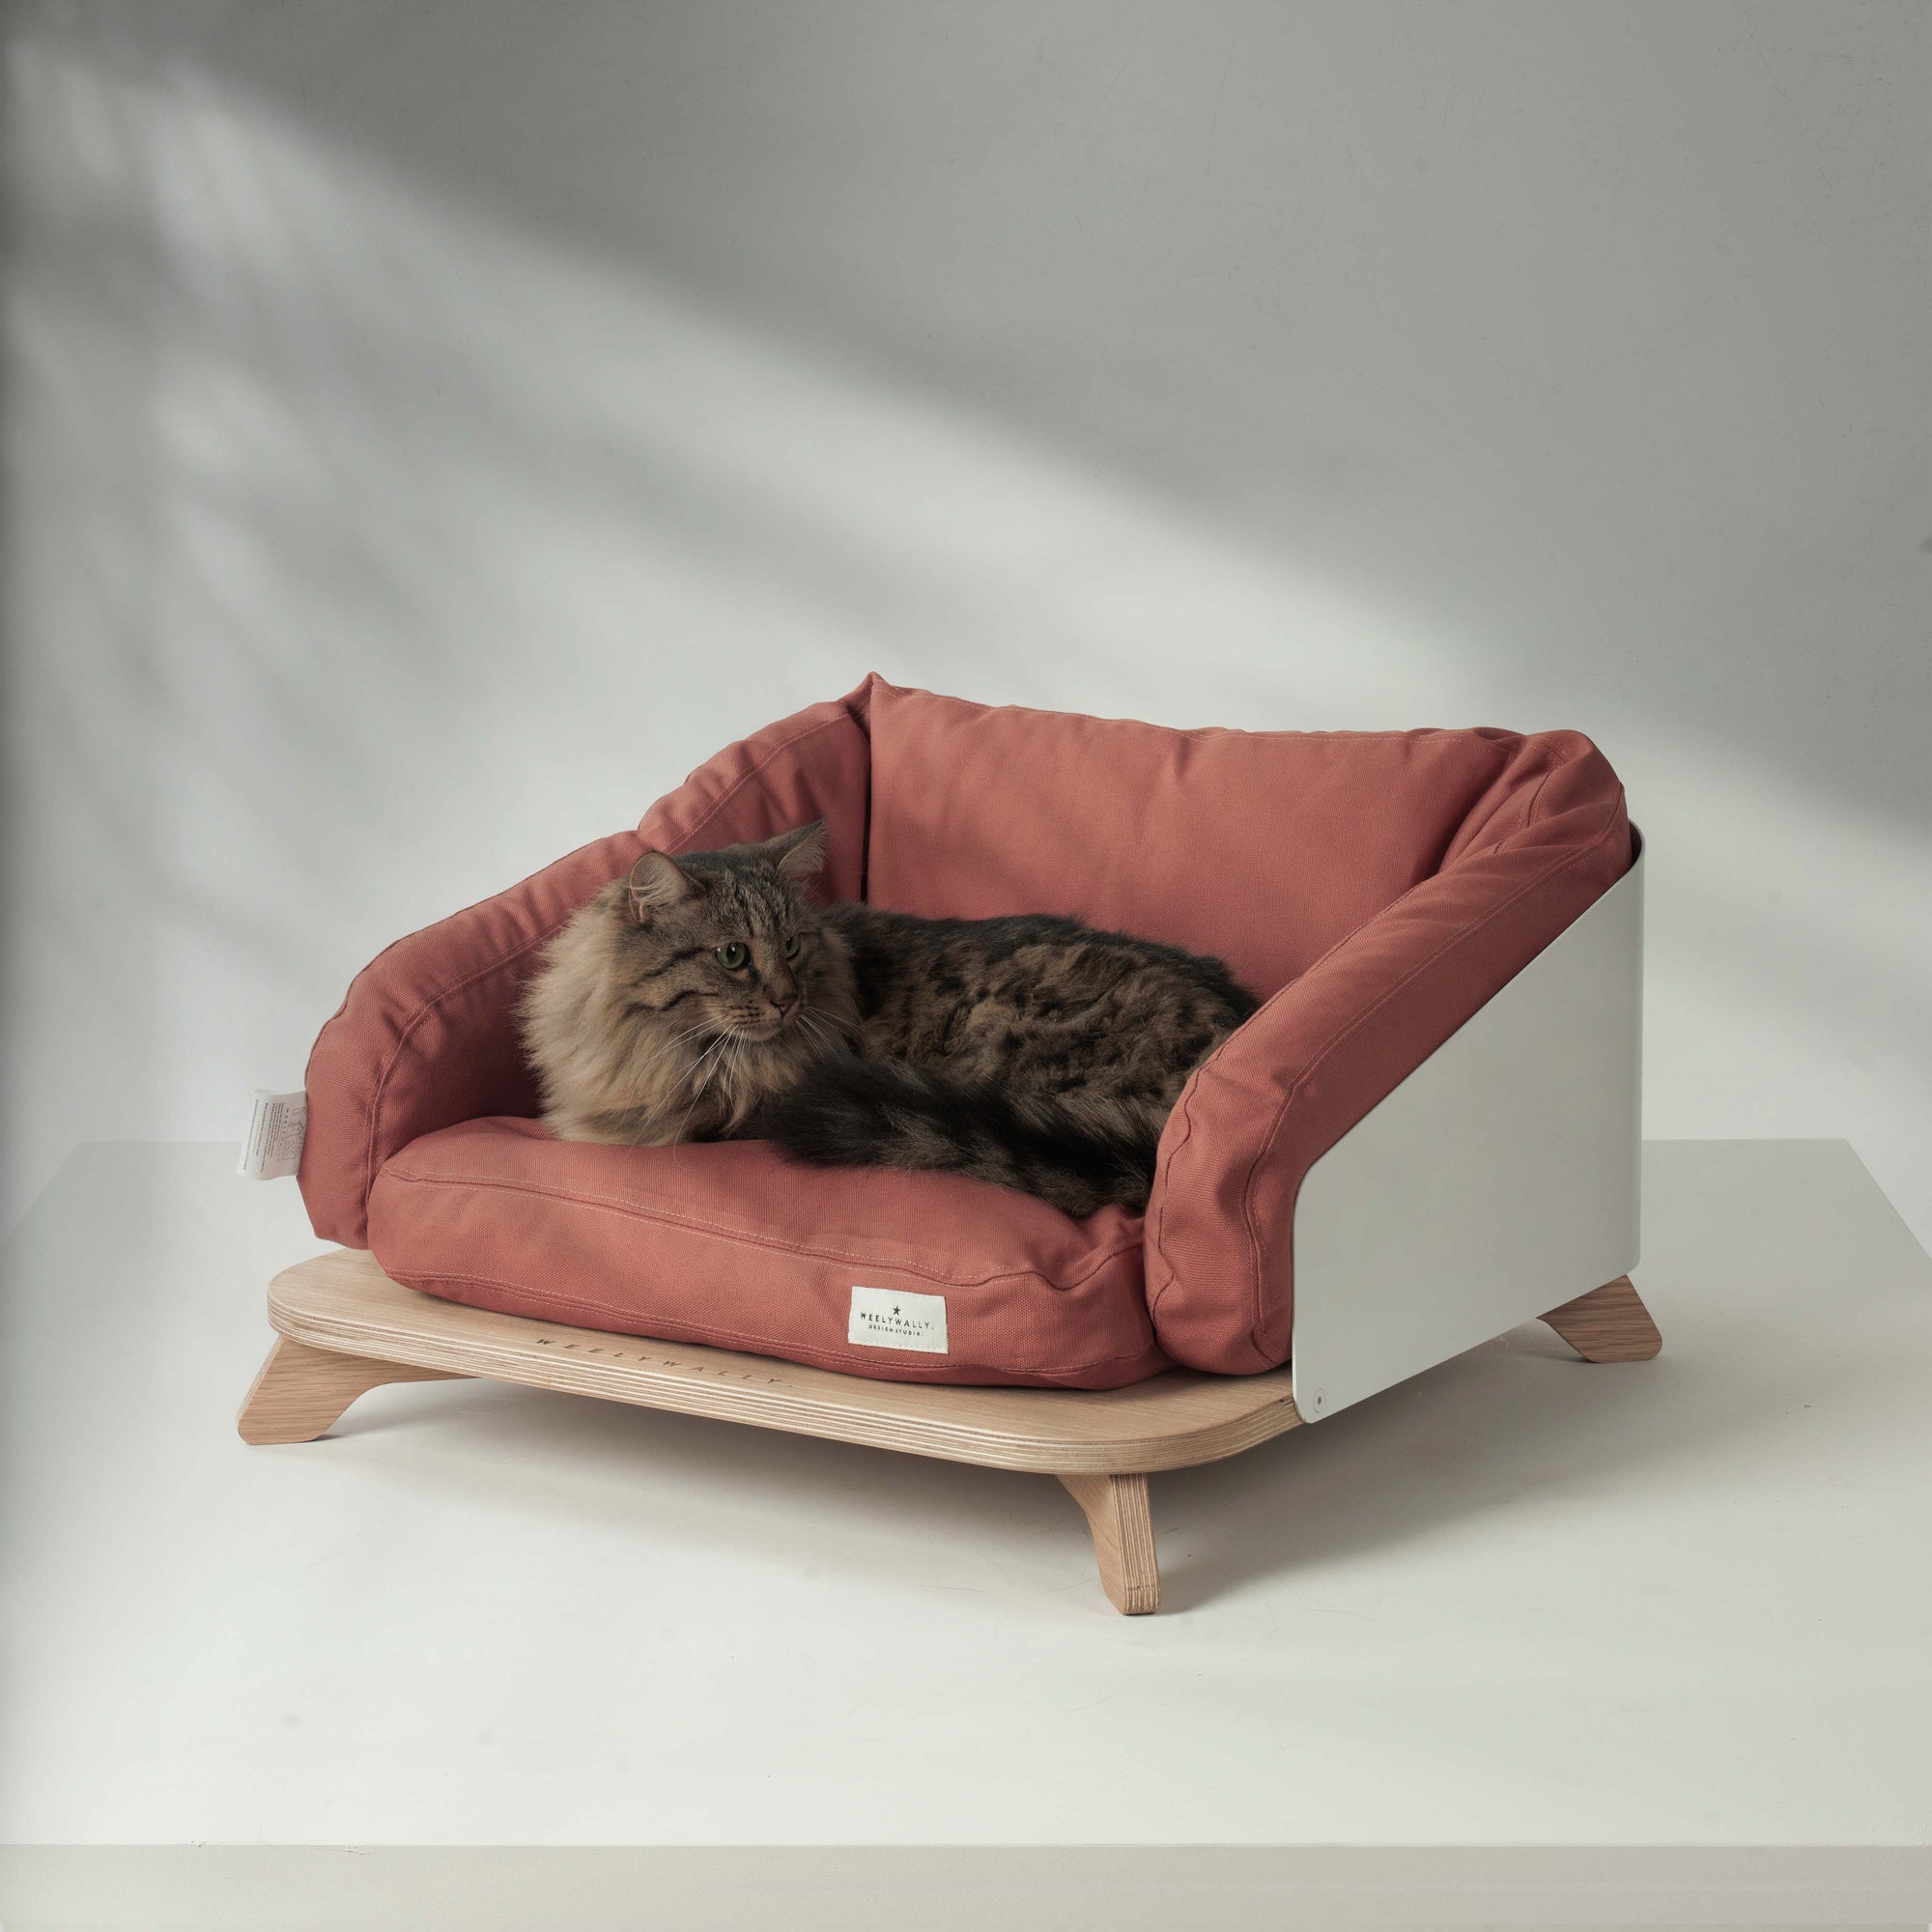 Elevated cat bed, sofa & couch, it puts your cat in the lap of napping!